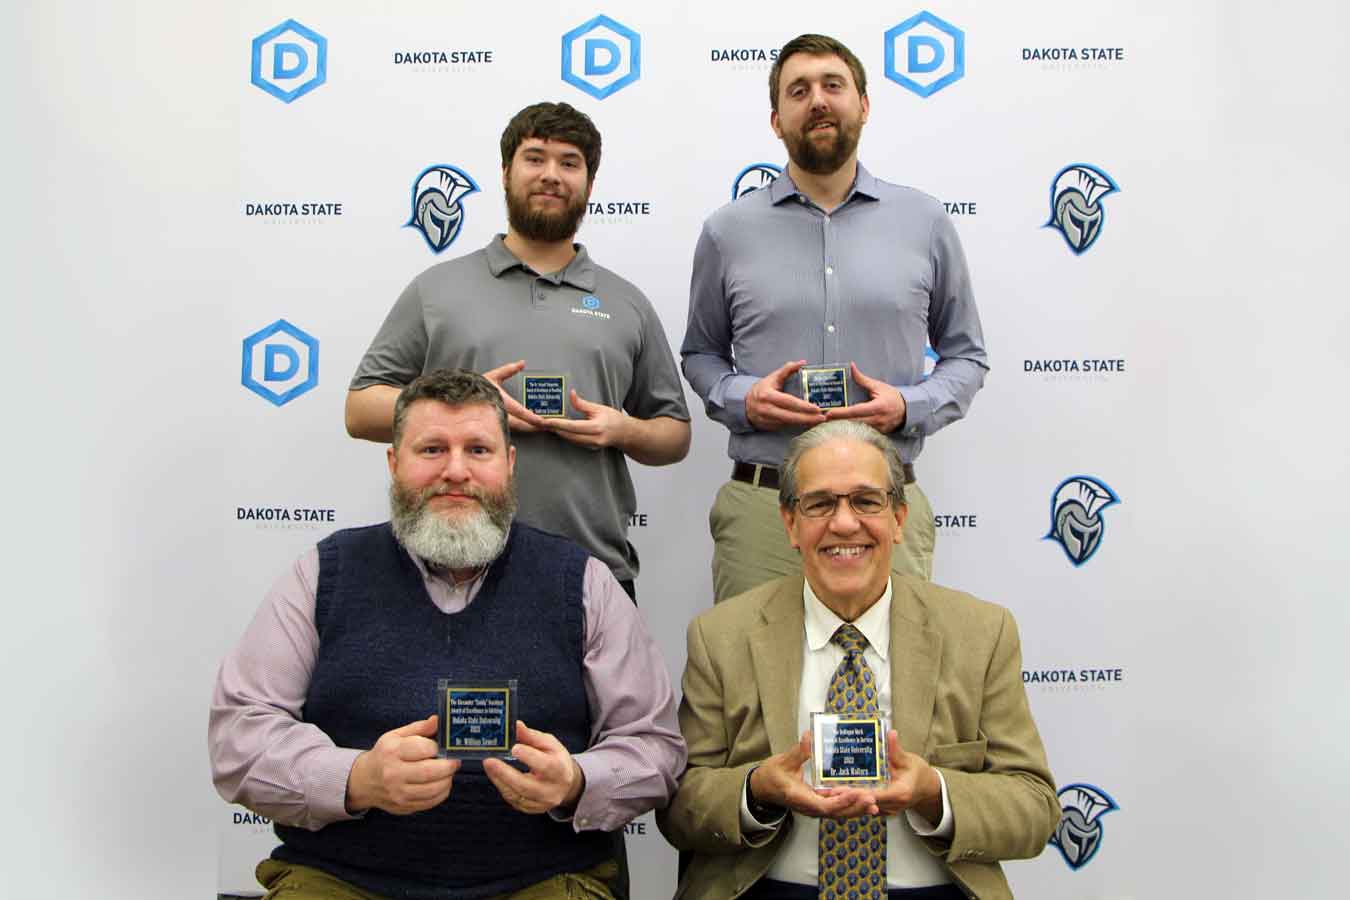 Four Dakota State University faculty members received awards at the annual Honors Reception on April 21.